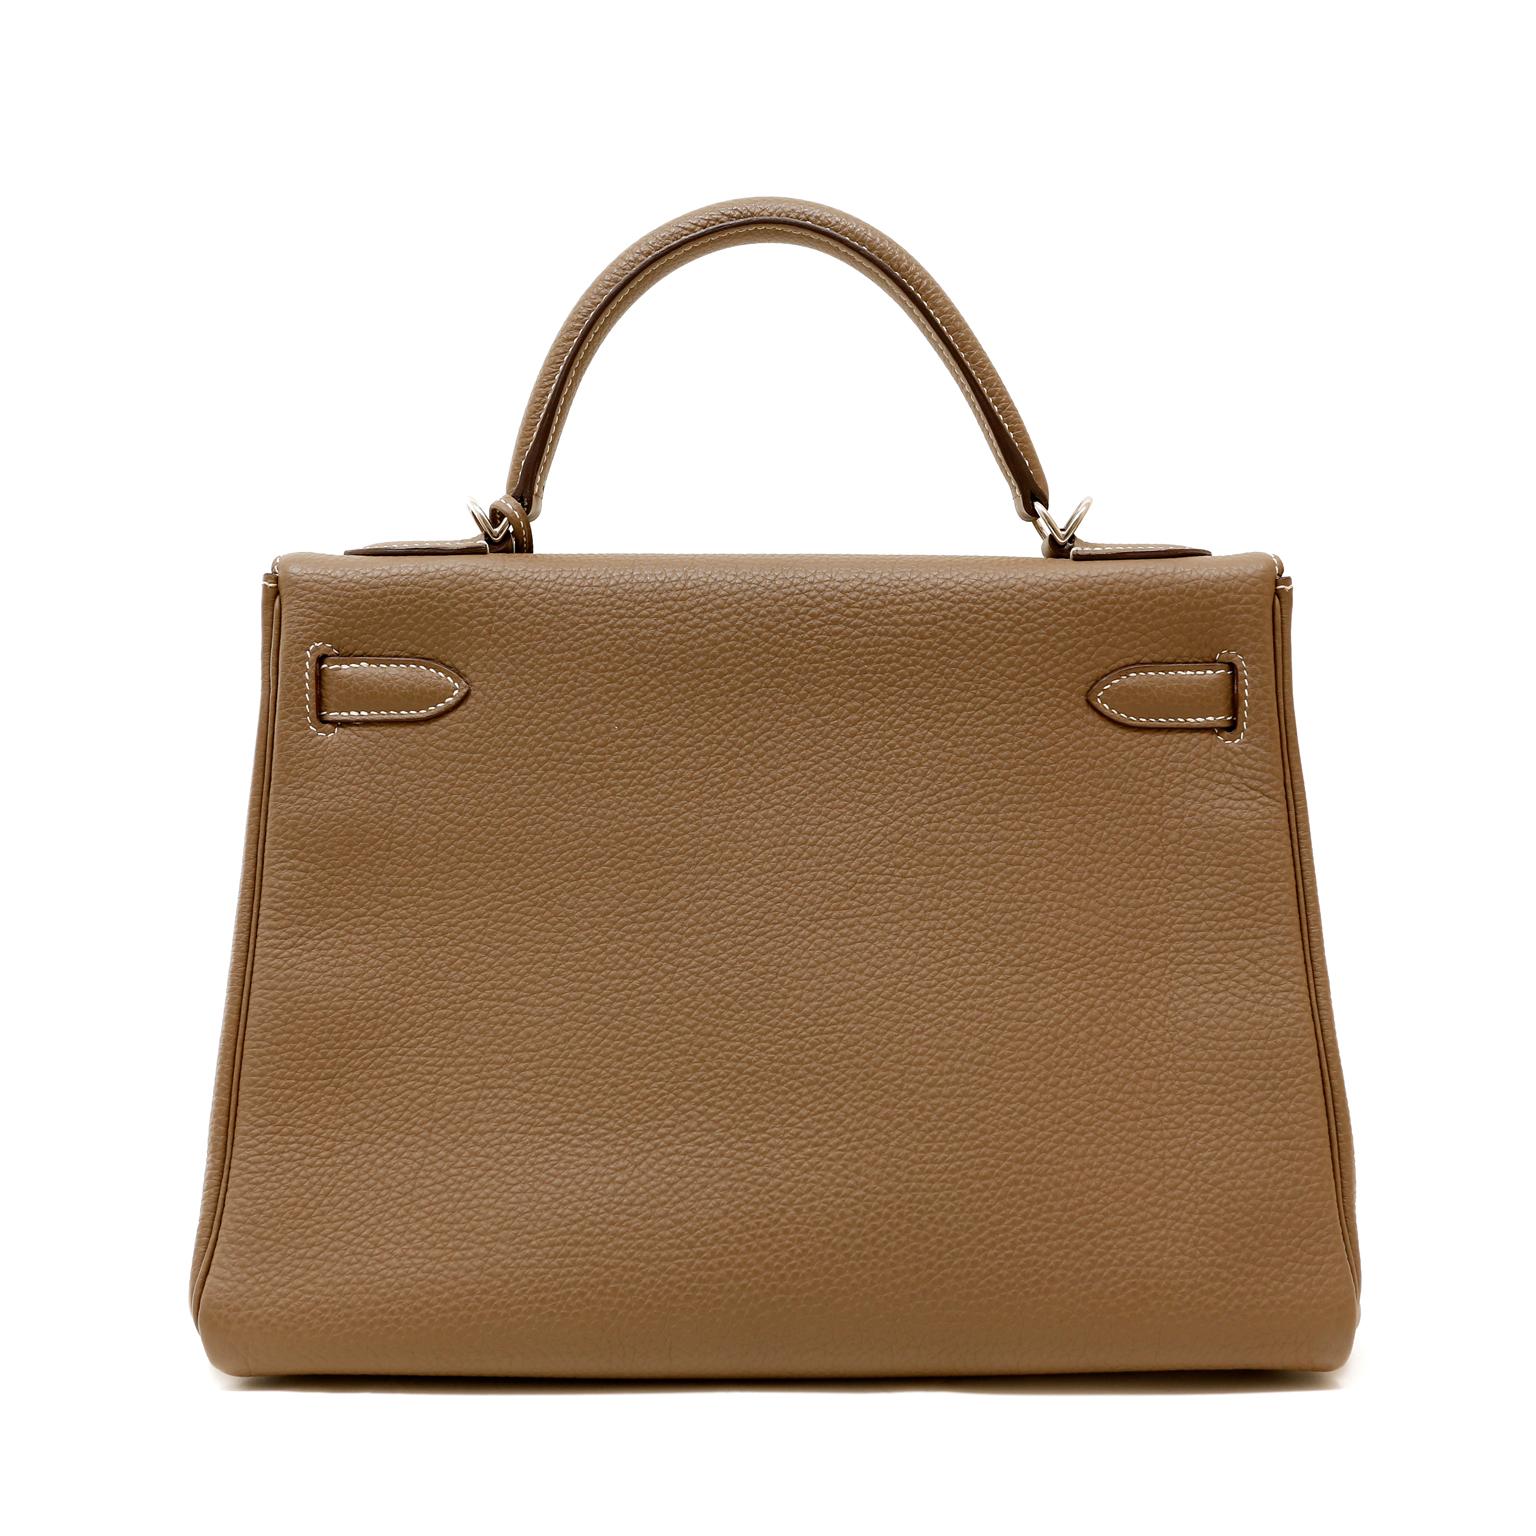 This authentic Hermès Taupe Togo Leather 32 cm Kelly is in excellent condition.  The ladylike Kelly is in high demand and requires extensive waiting periods from Hermès.  Neutral taupe paired with Palladium hardware is a classic addition to any